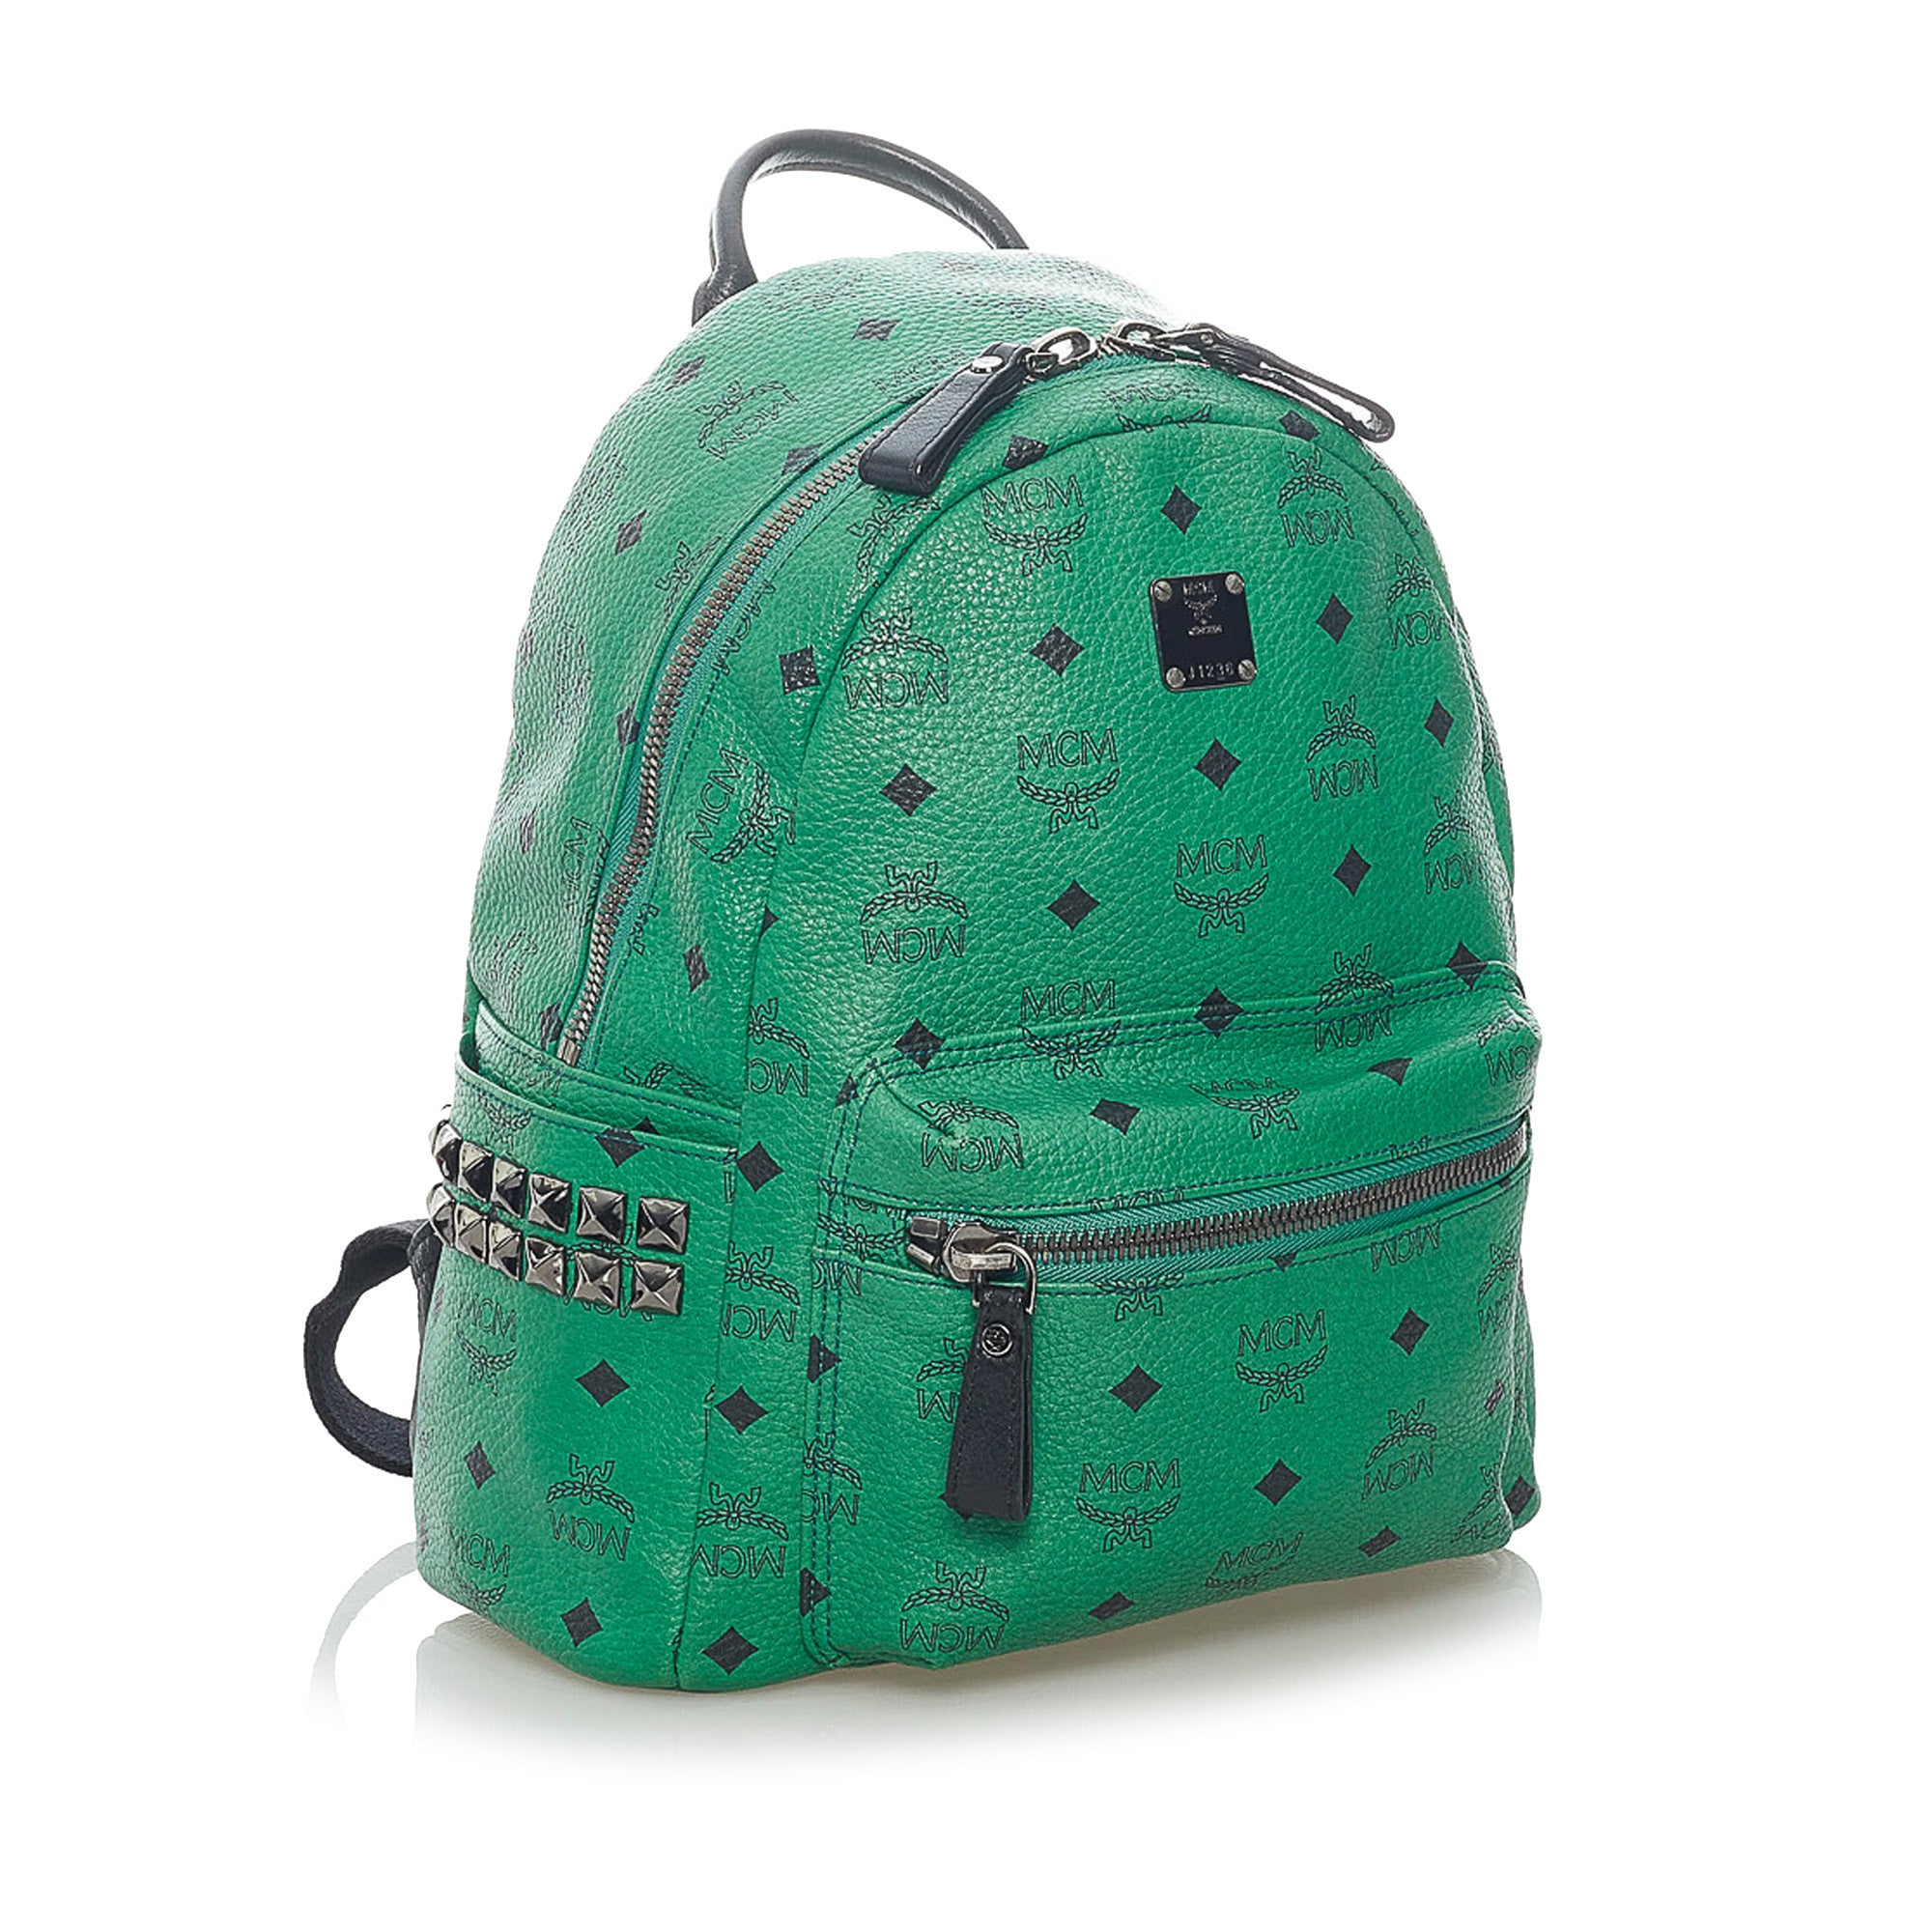 MCM Green Visetos Paradiso Leather Backpack Multiple colors Pony